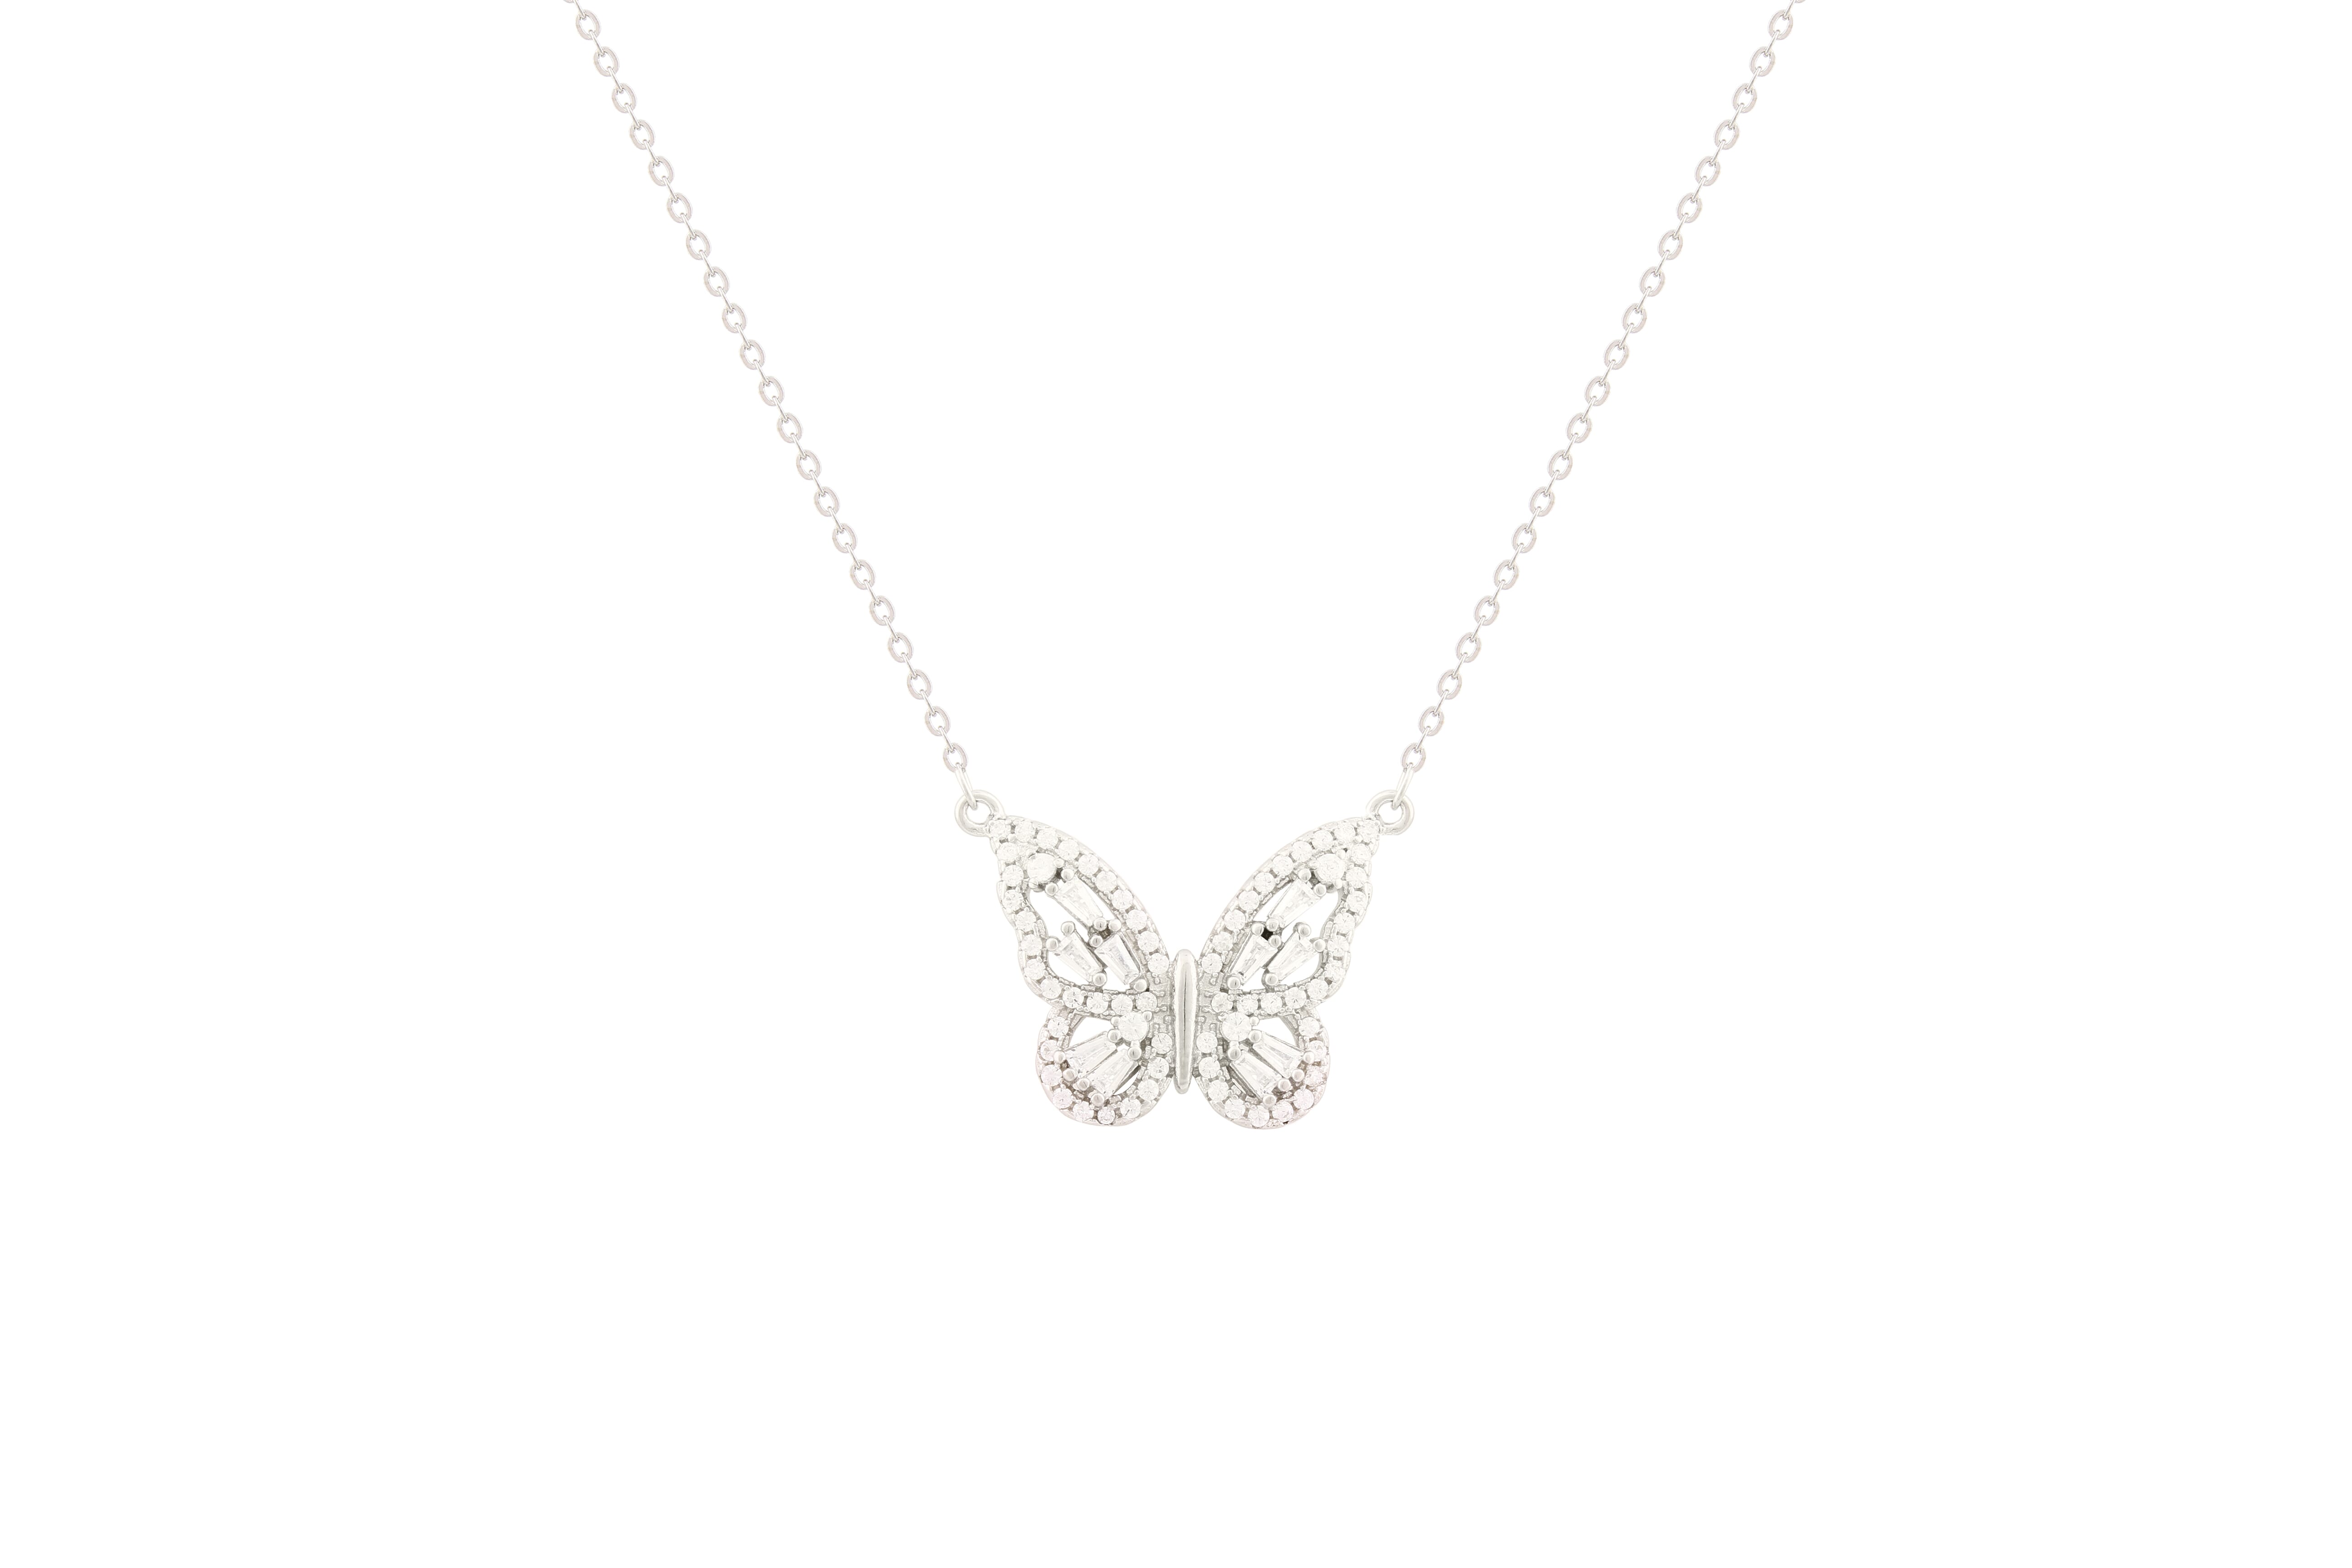 Asfour Chain Necklace With Butterfly Design